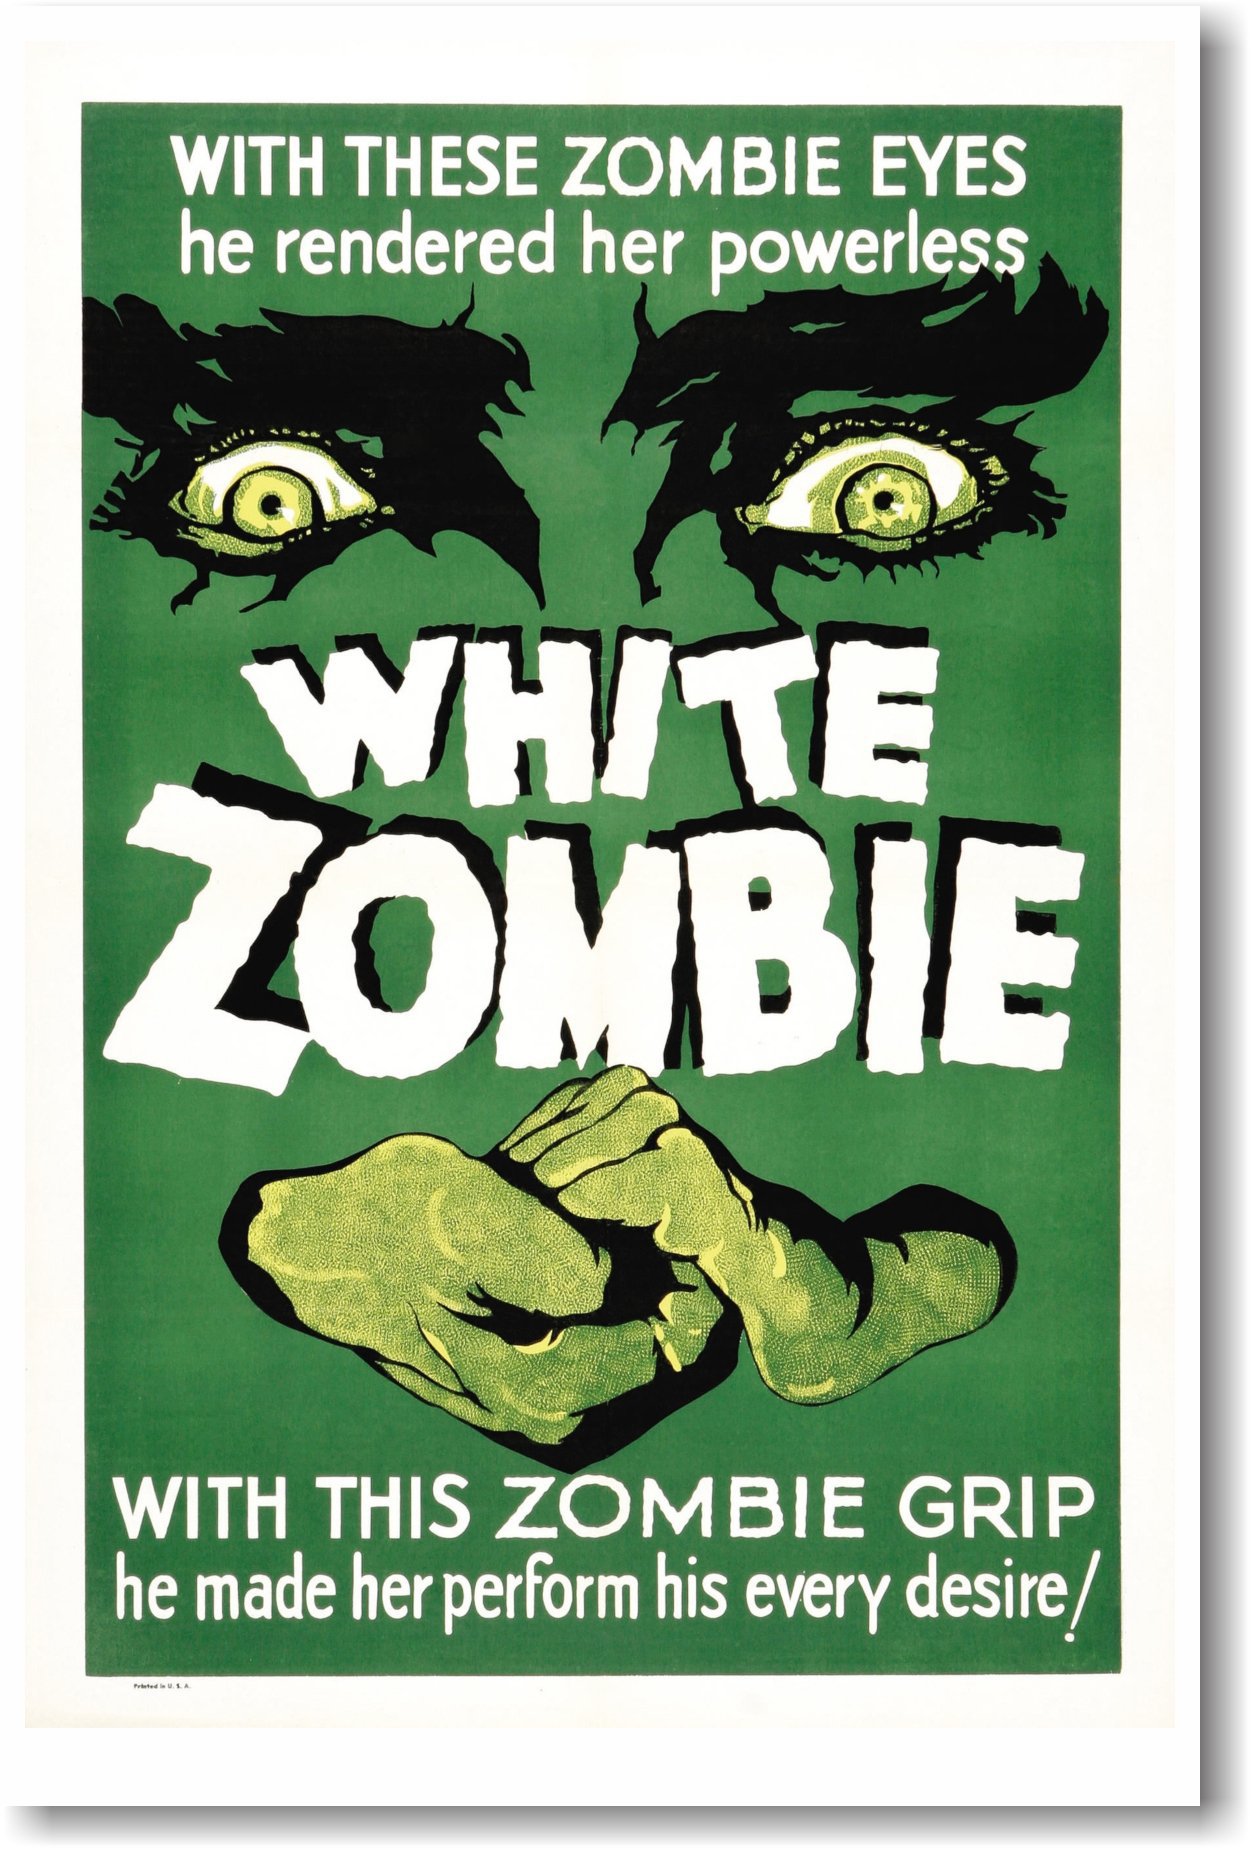 Green Background with text reading "White Zombie"